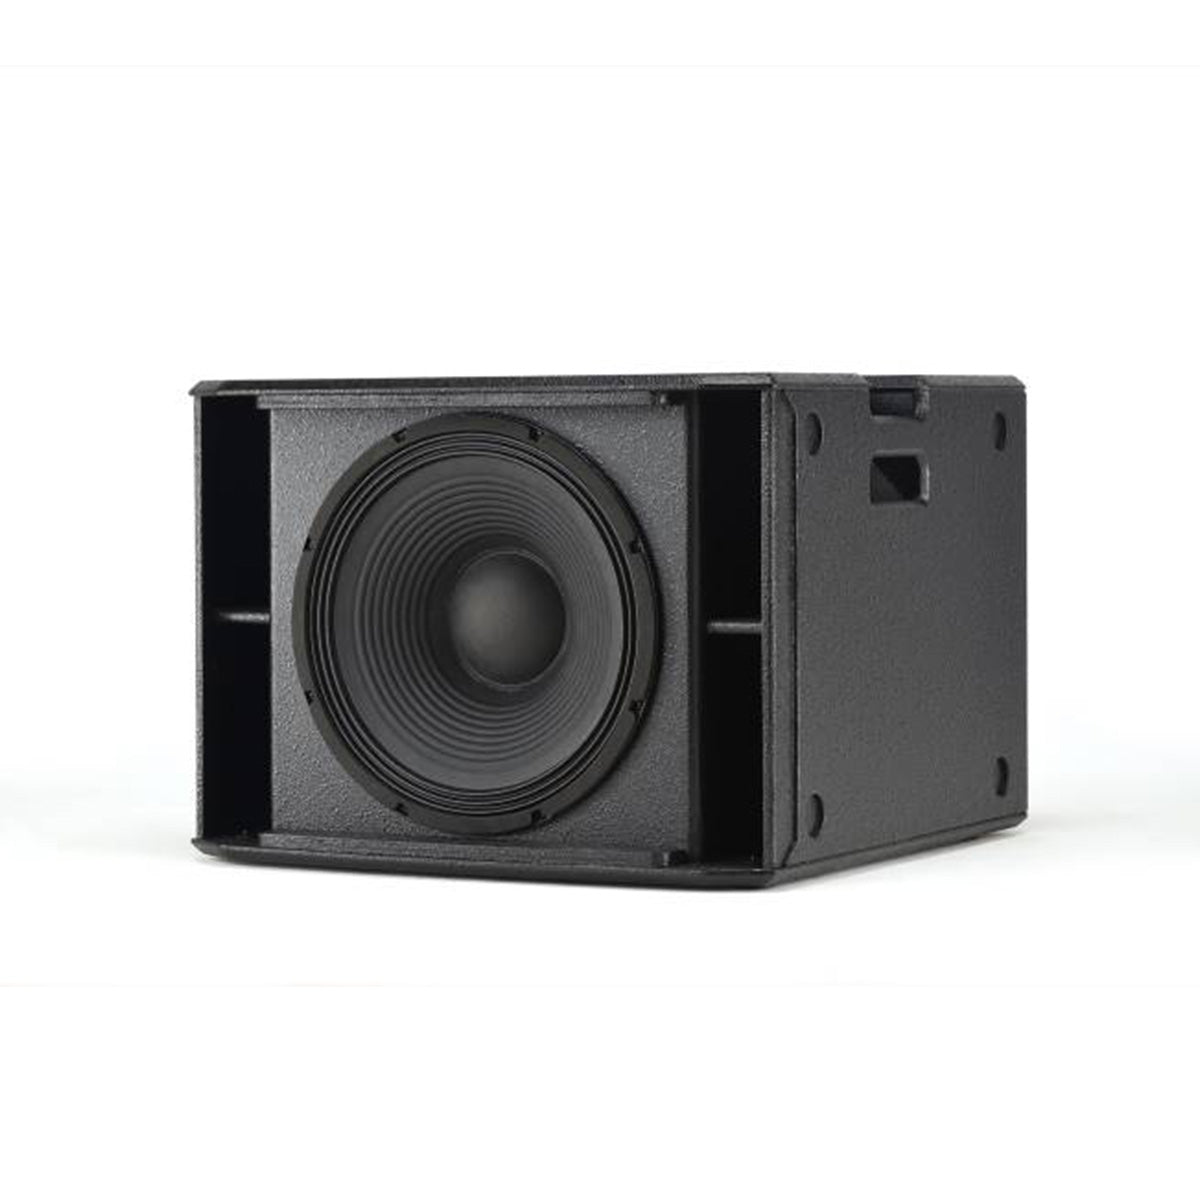 dB Technologies SUB 915 Active Subwoofer 15inch 900W RMS / 1800W Peak